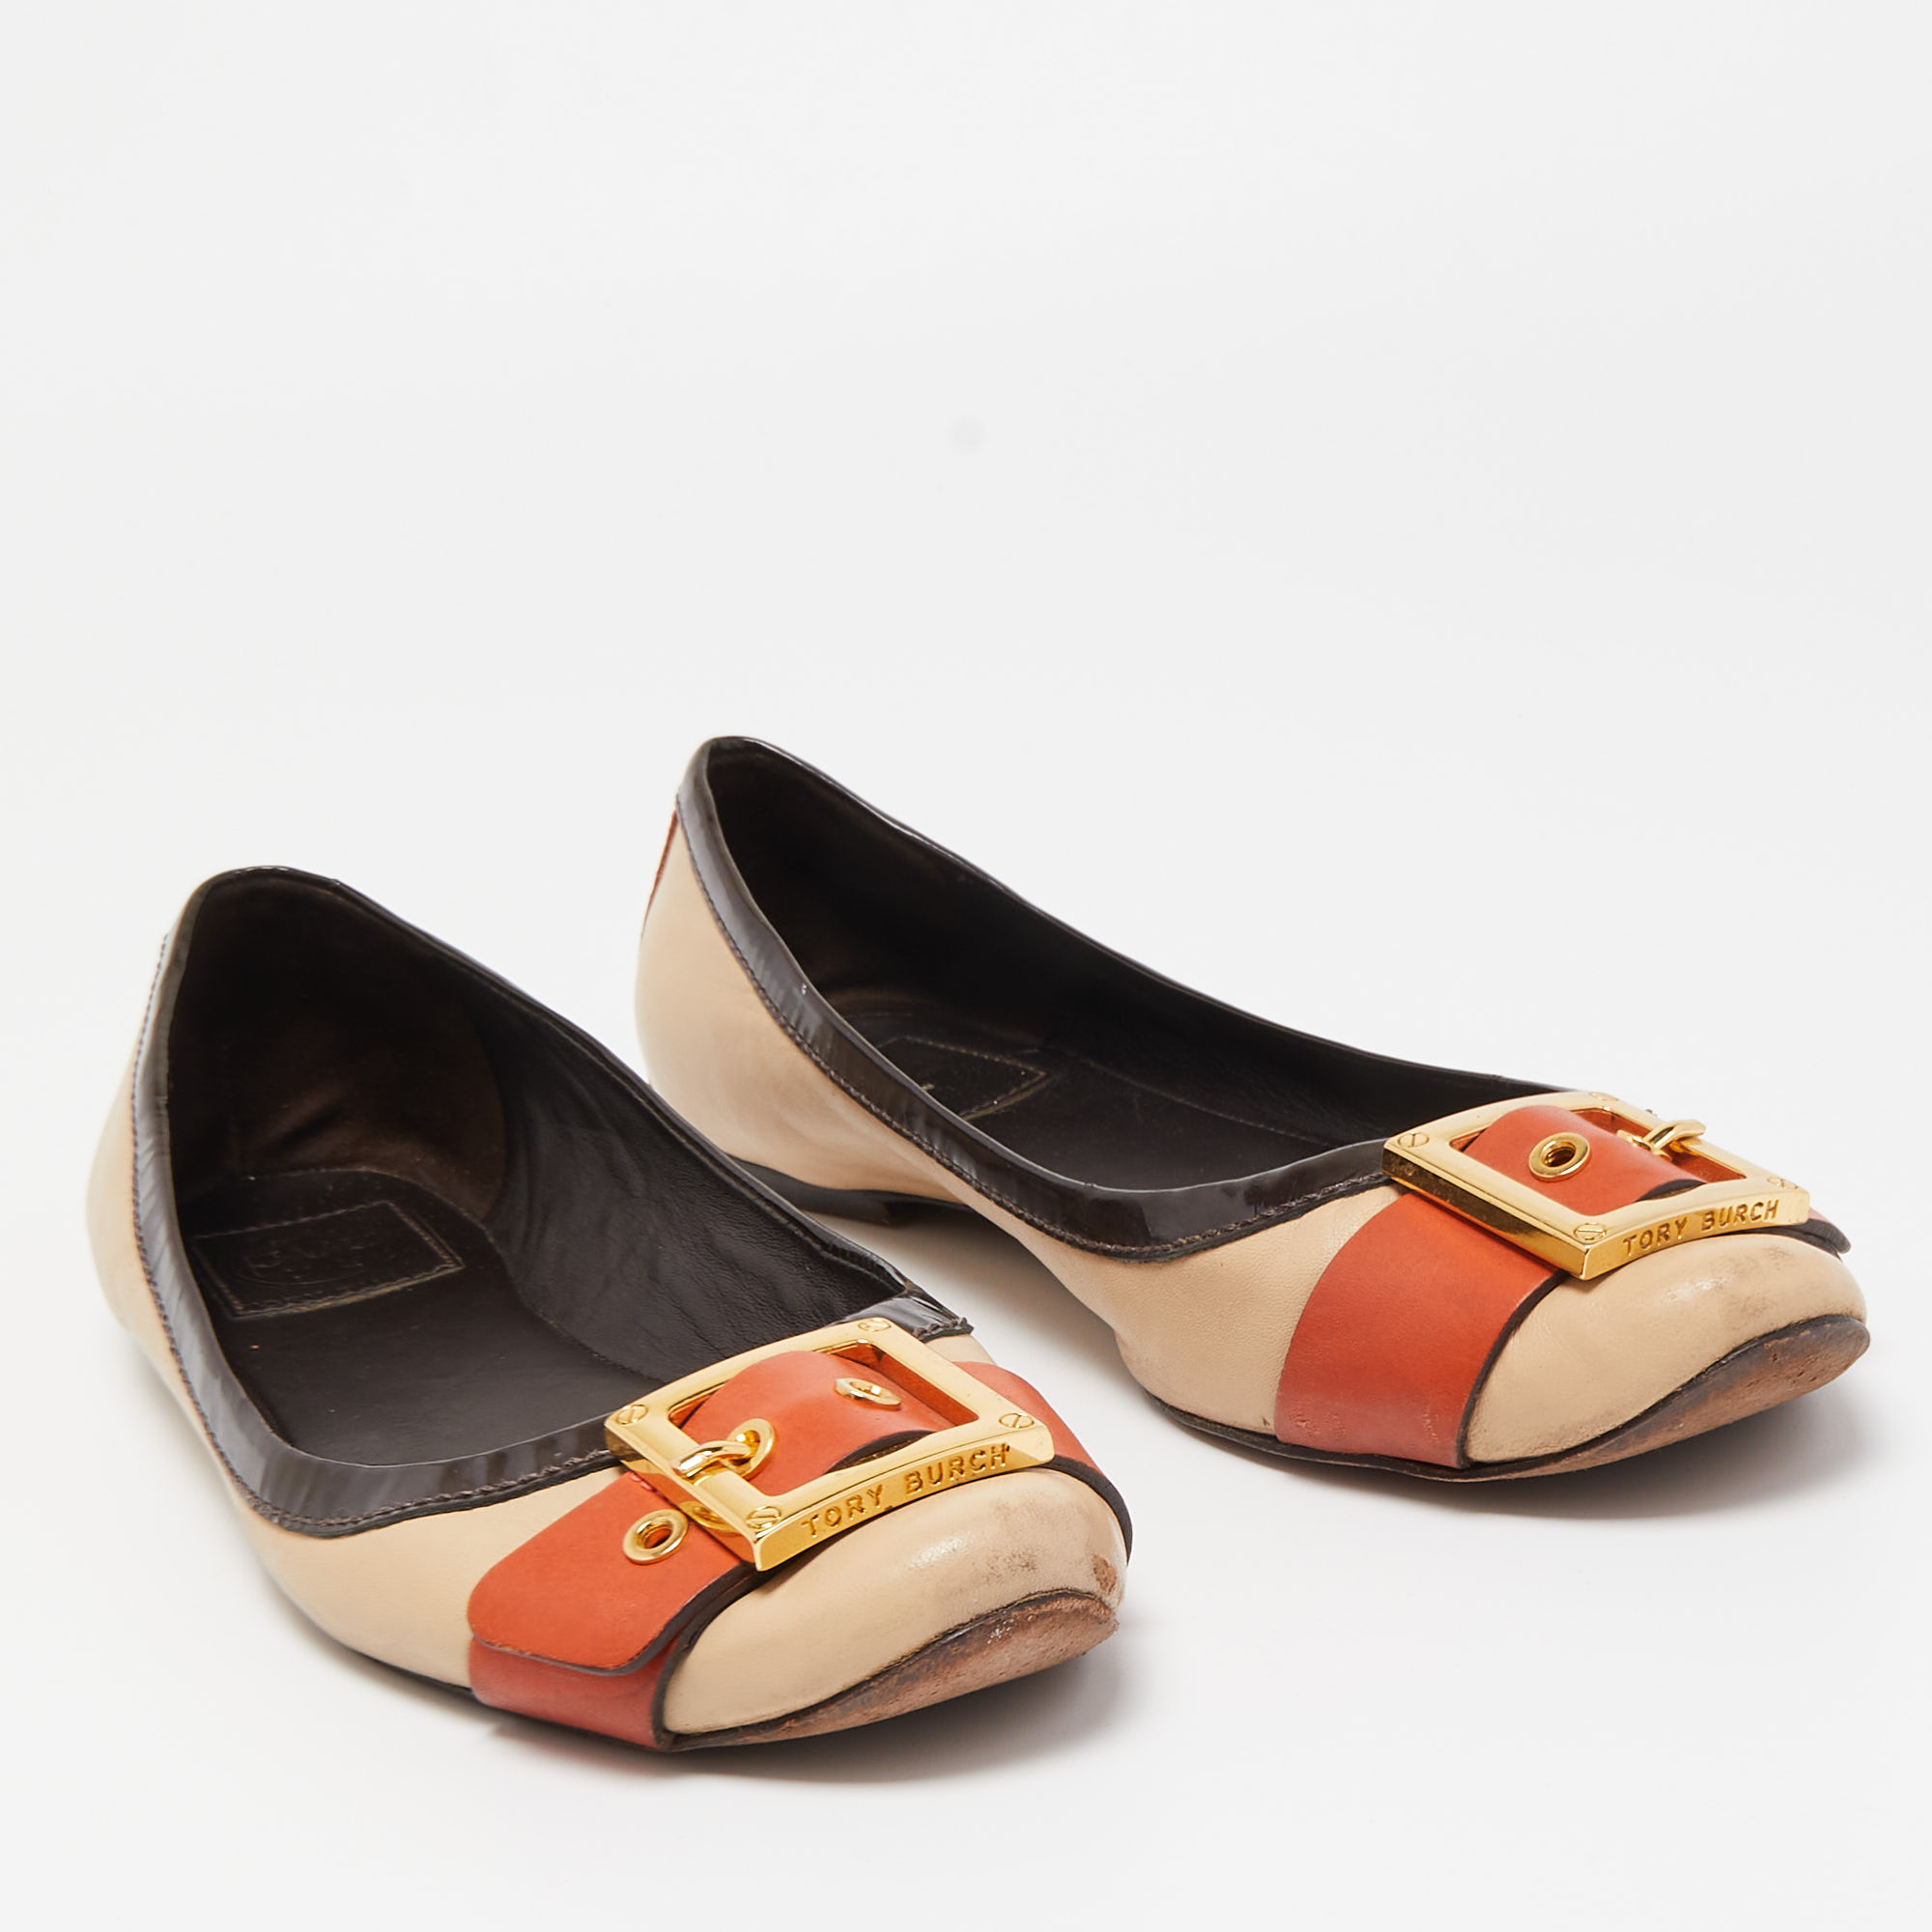 Tory Burch Tricolor Leather Ballet Flats Size 40.5